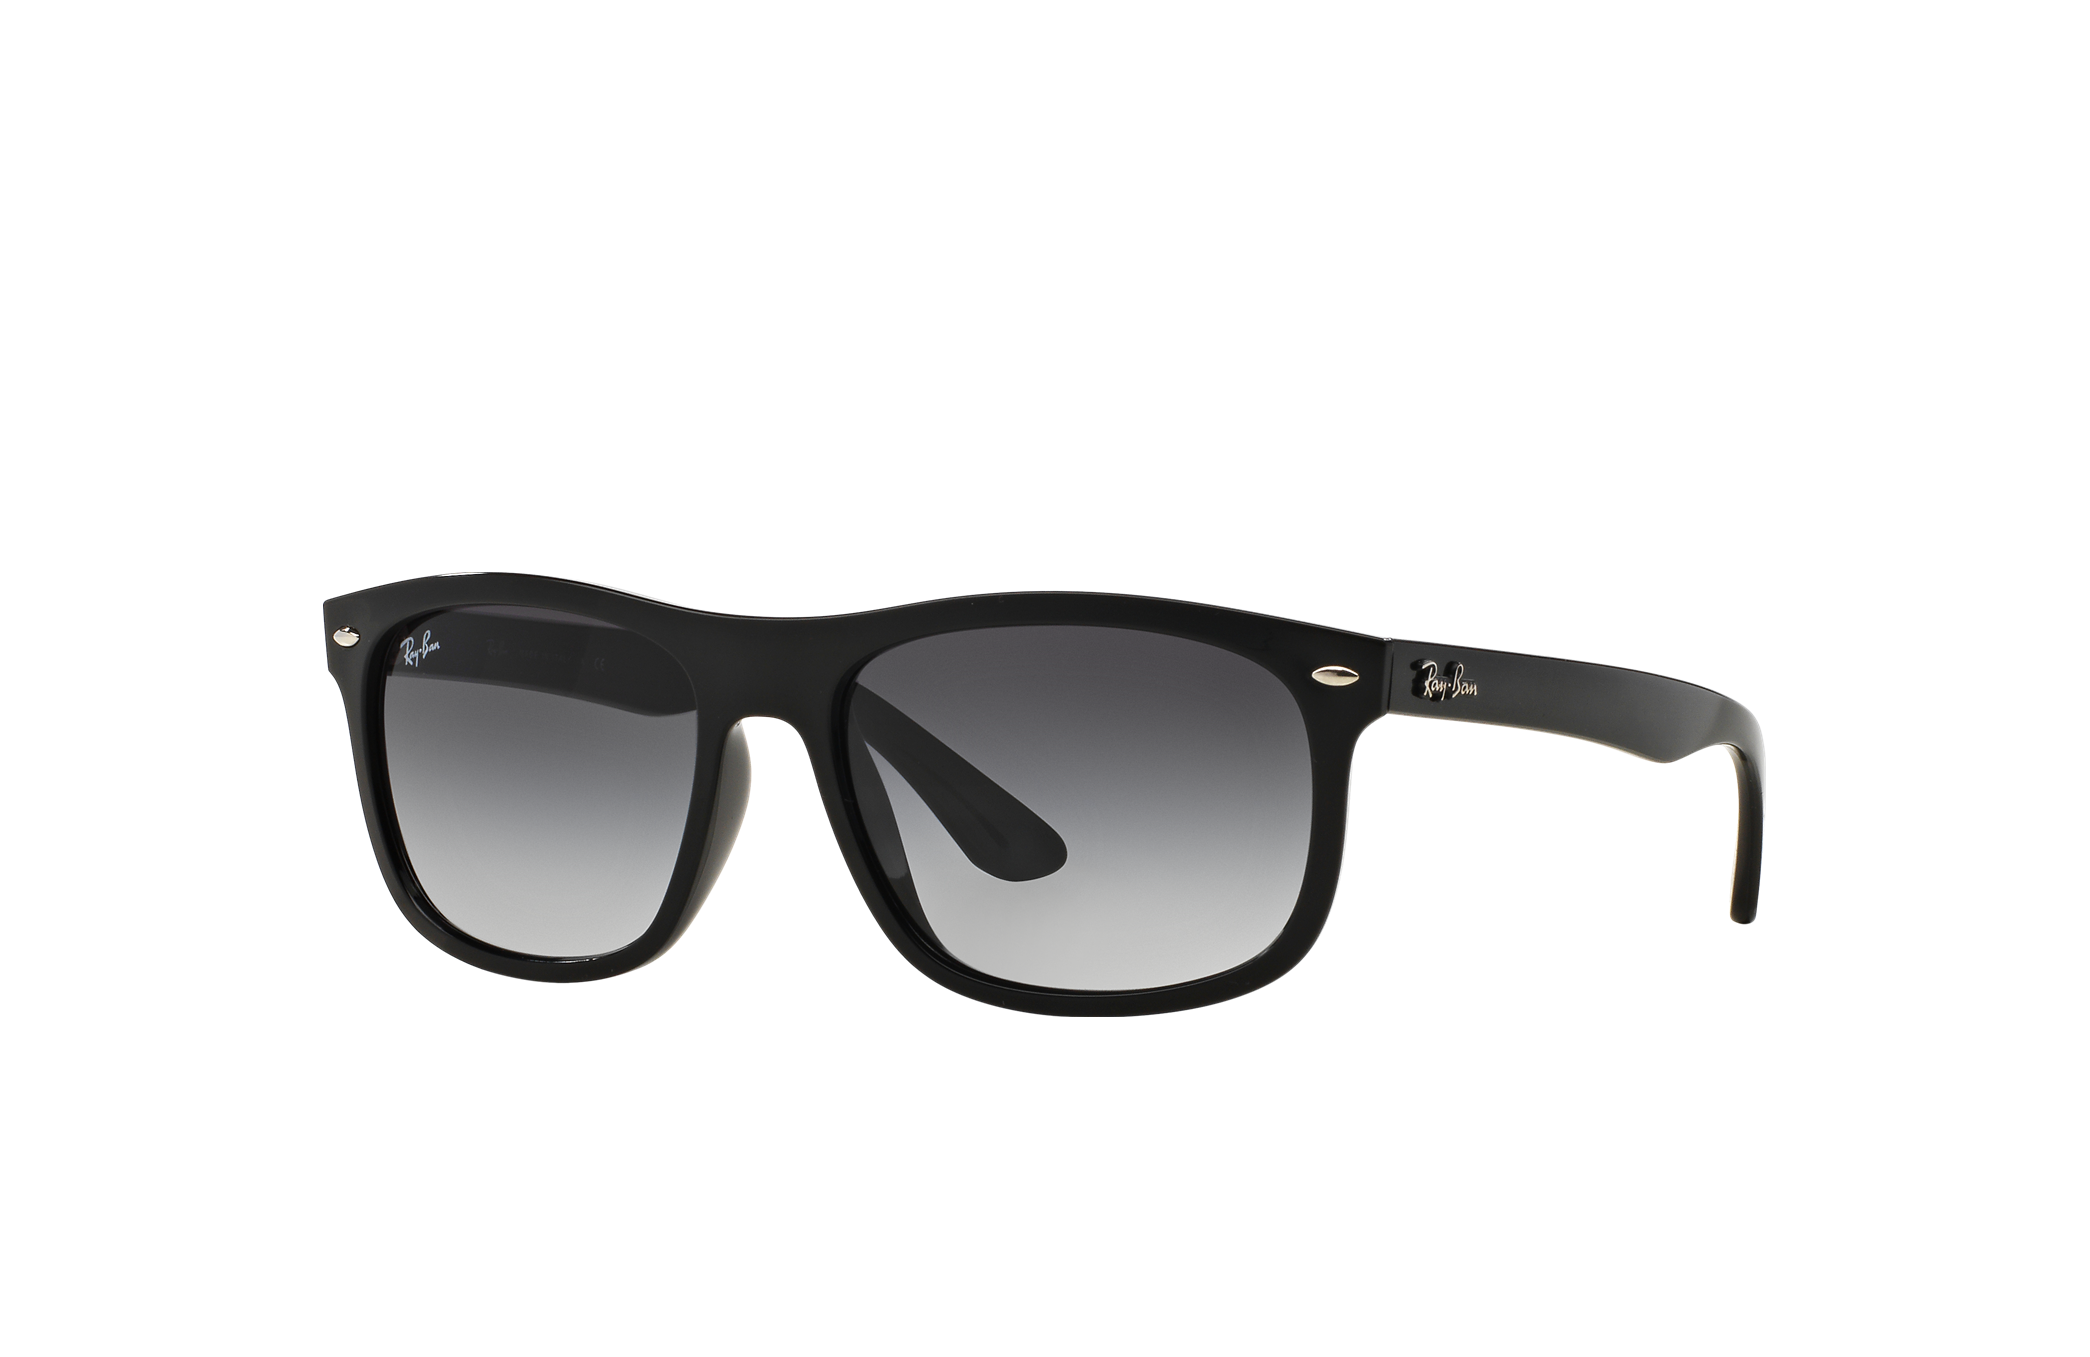 Rb4226 Sunglasses in Black and Grey | Ray-Ban®